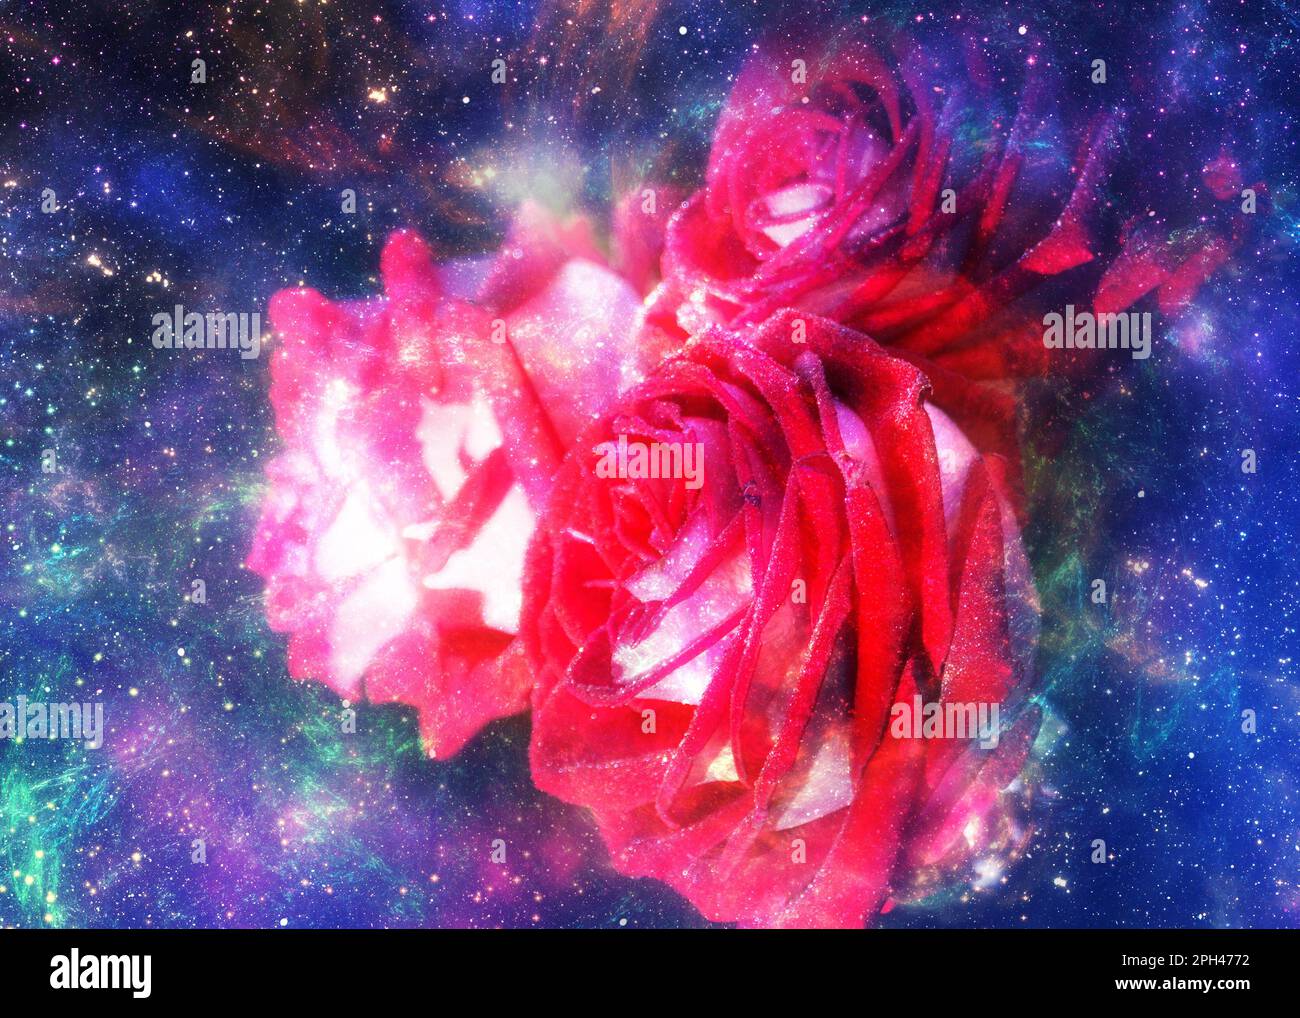 Red rose flower over starry space background, illustration, photo manipulation. Stock Photo